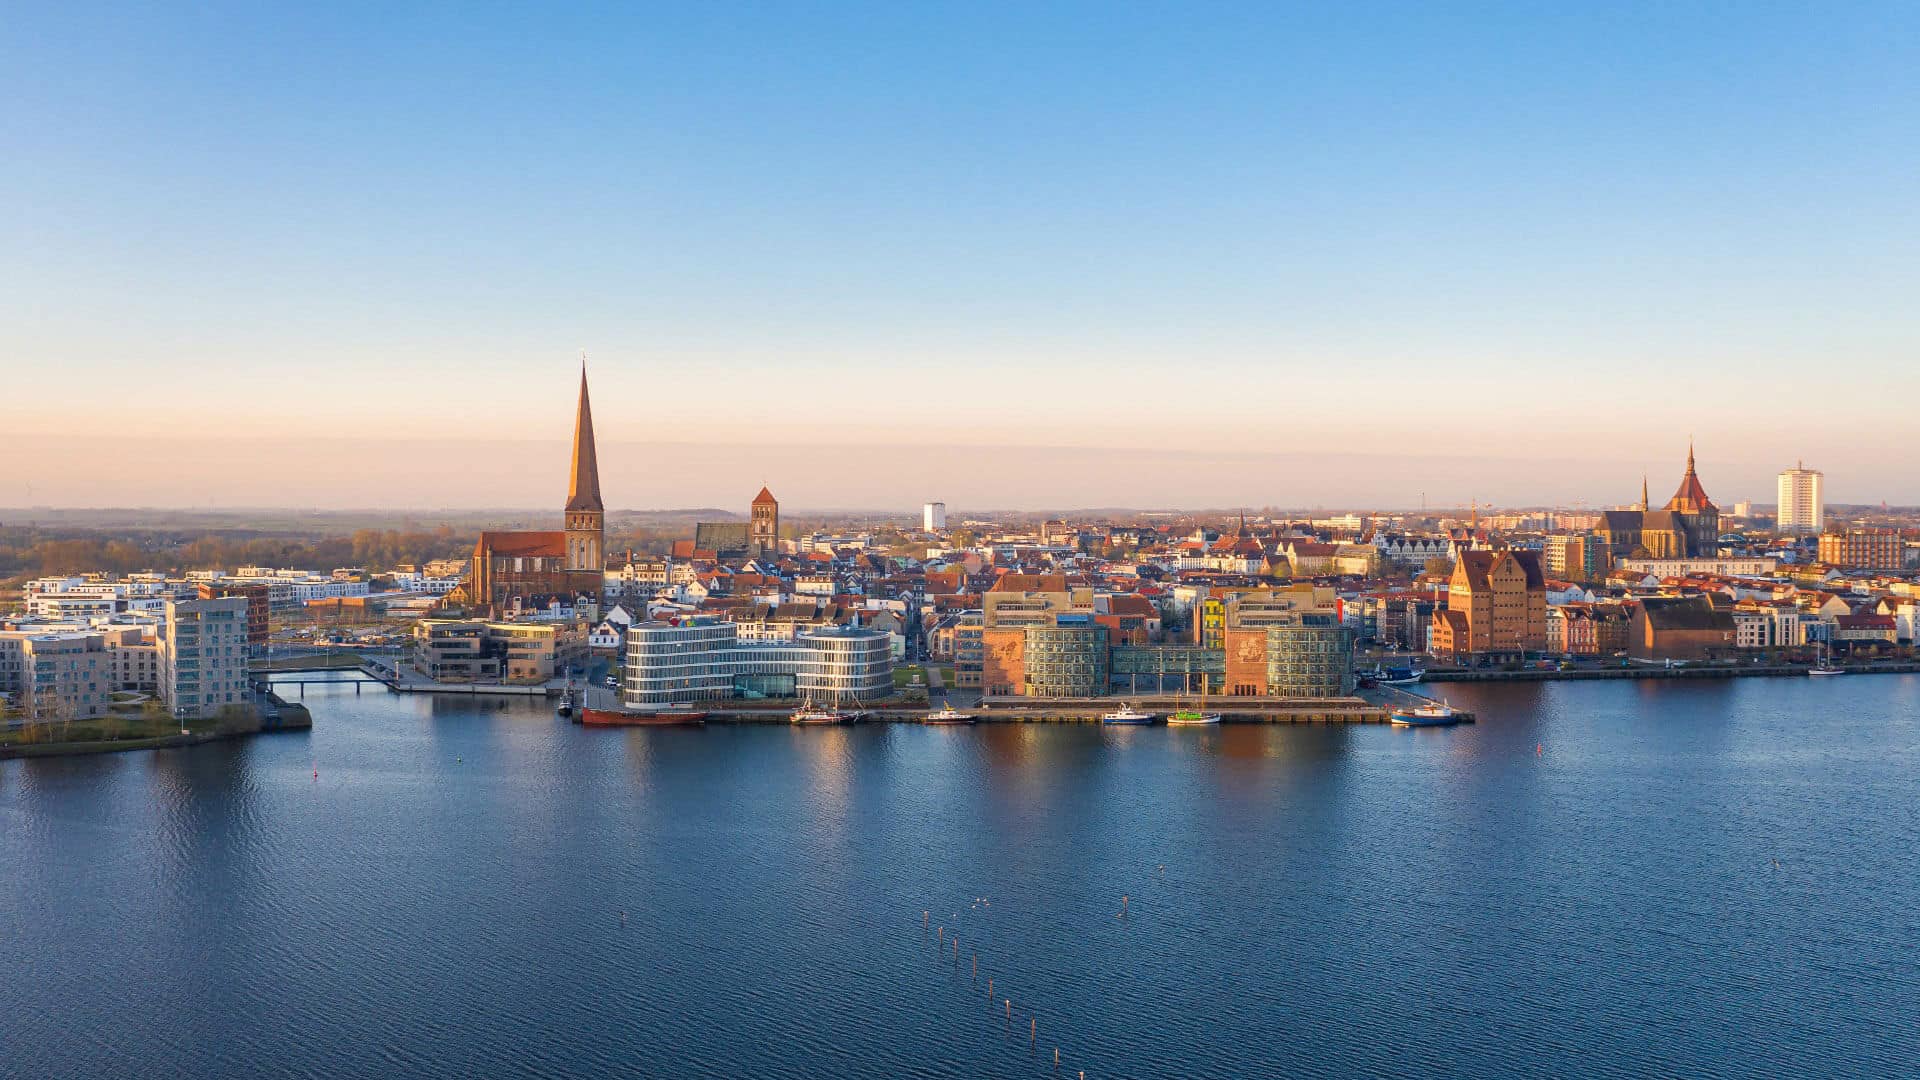 Sunrise over the city of rostock germany